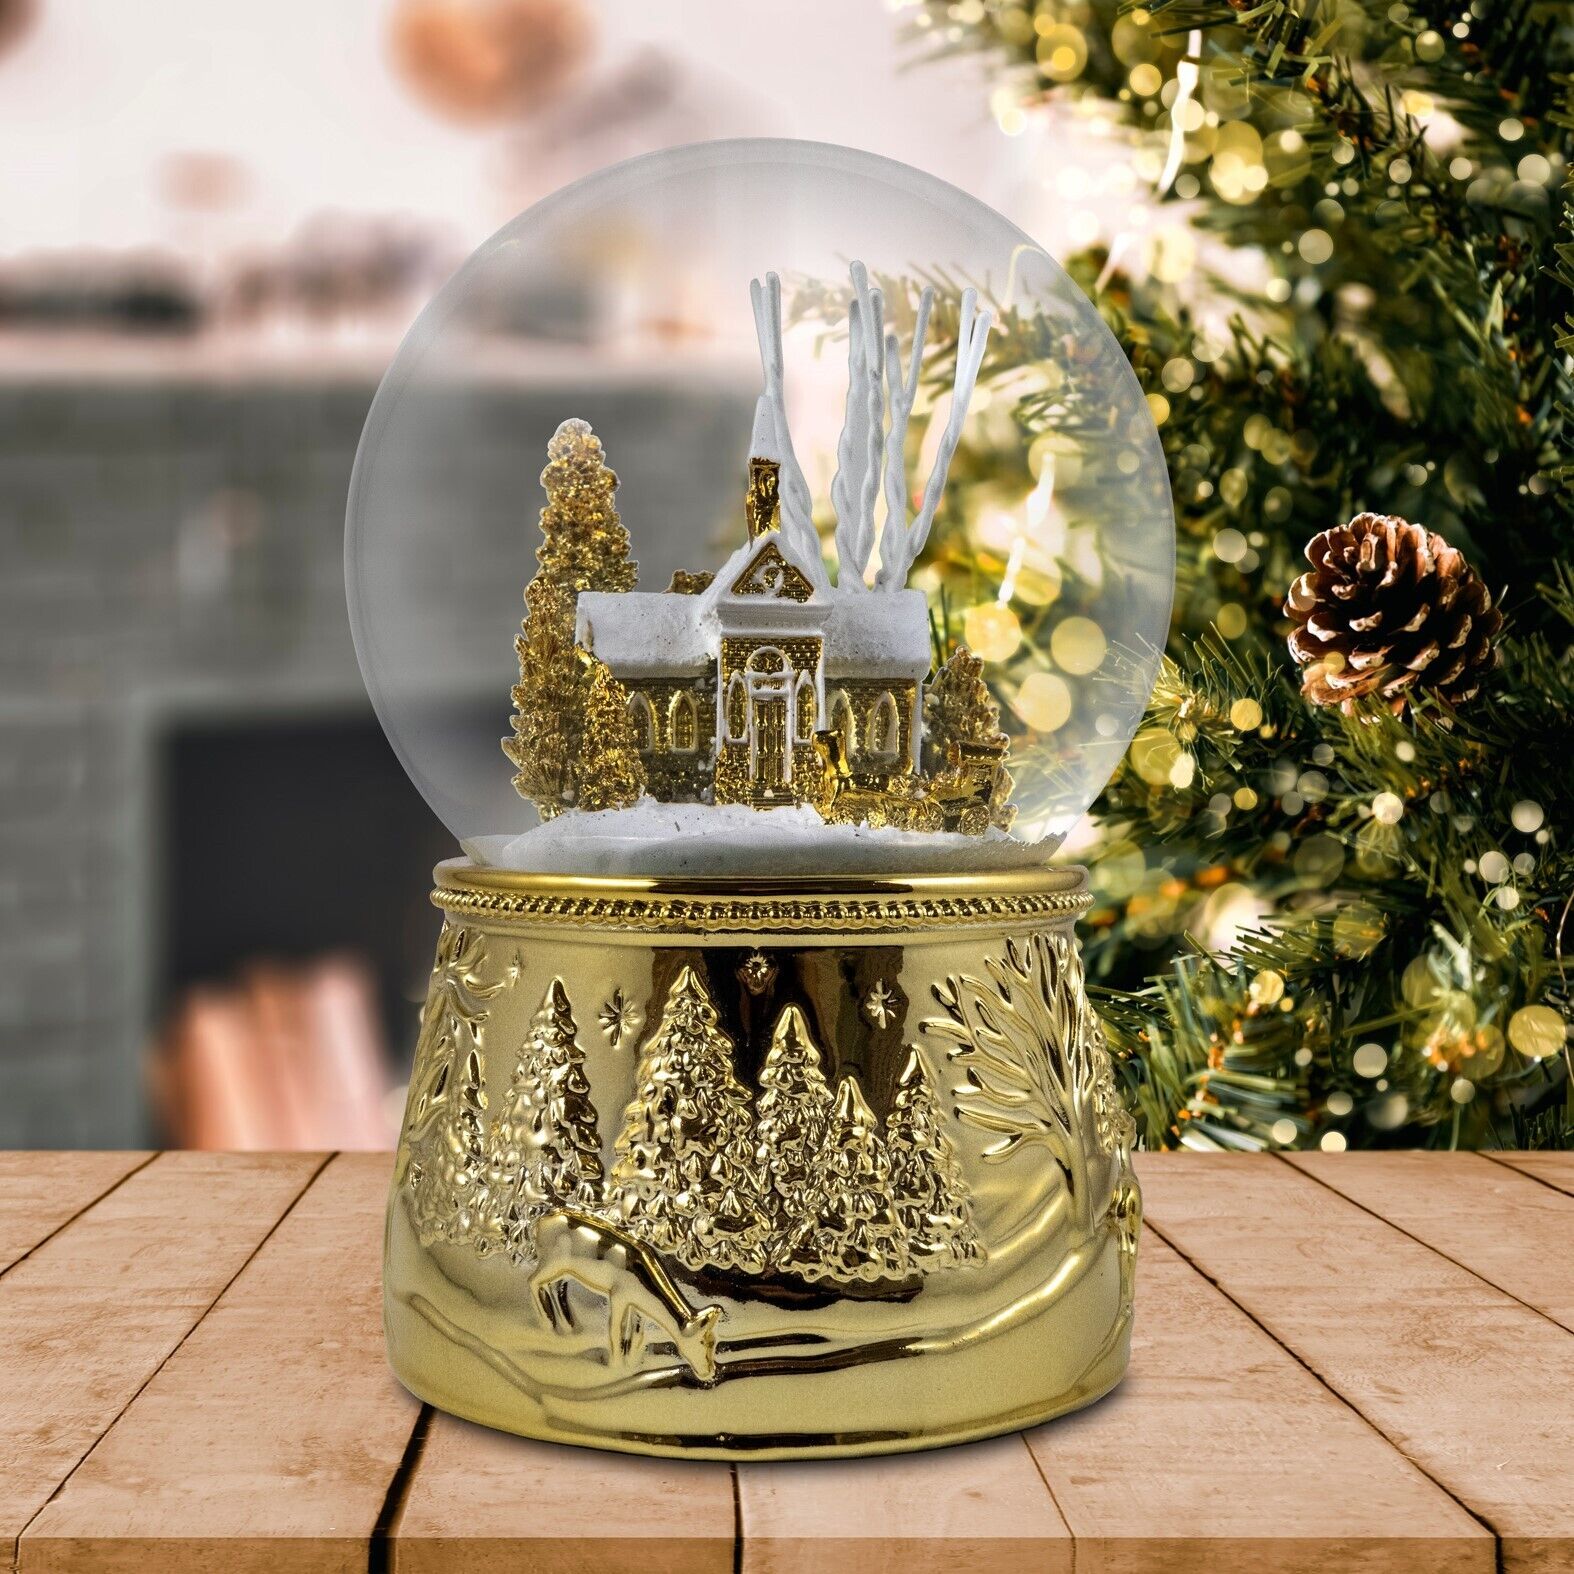 100mm Golden House Scene Water Globe by The San Francisco Music Box Company